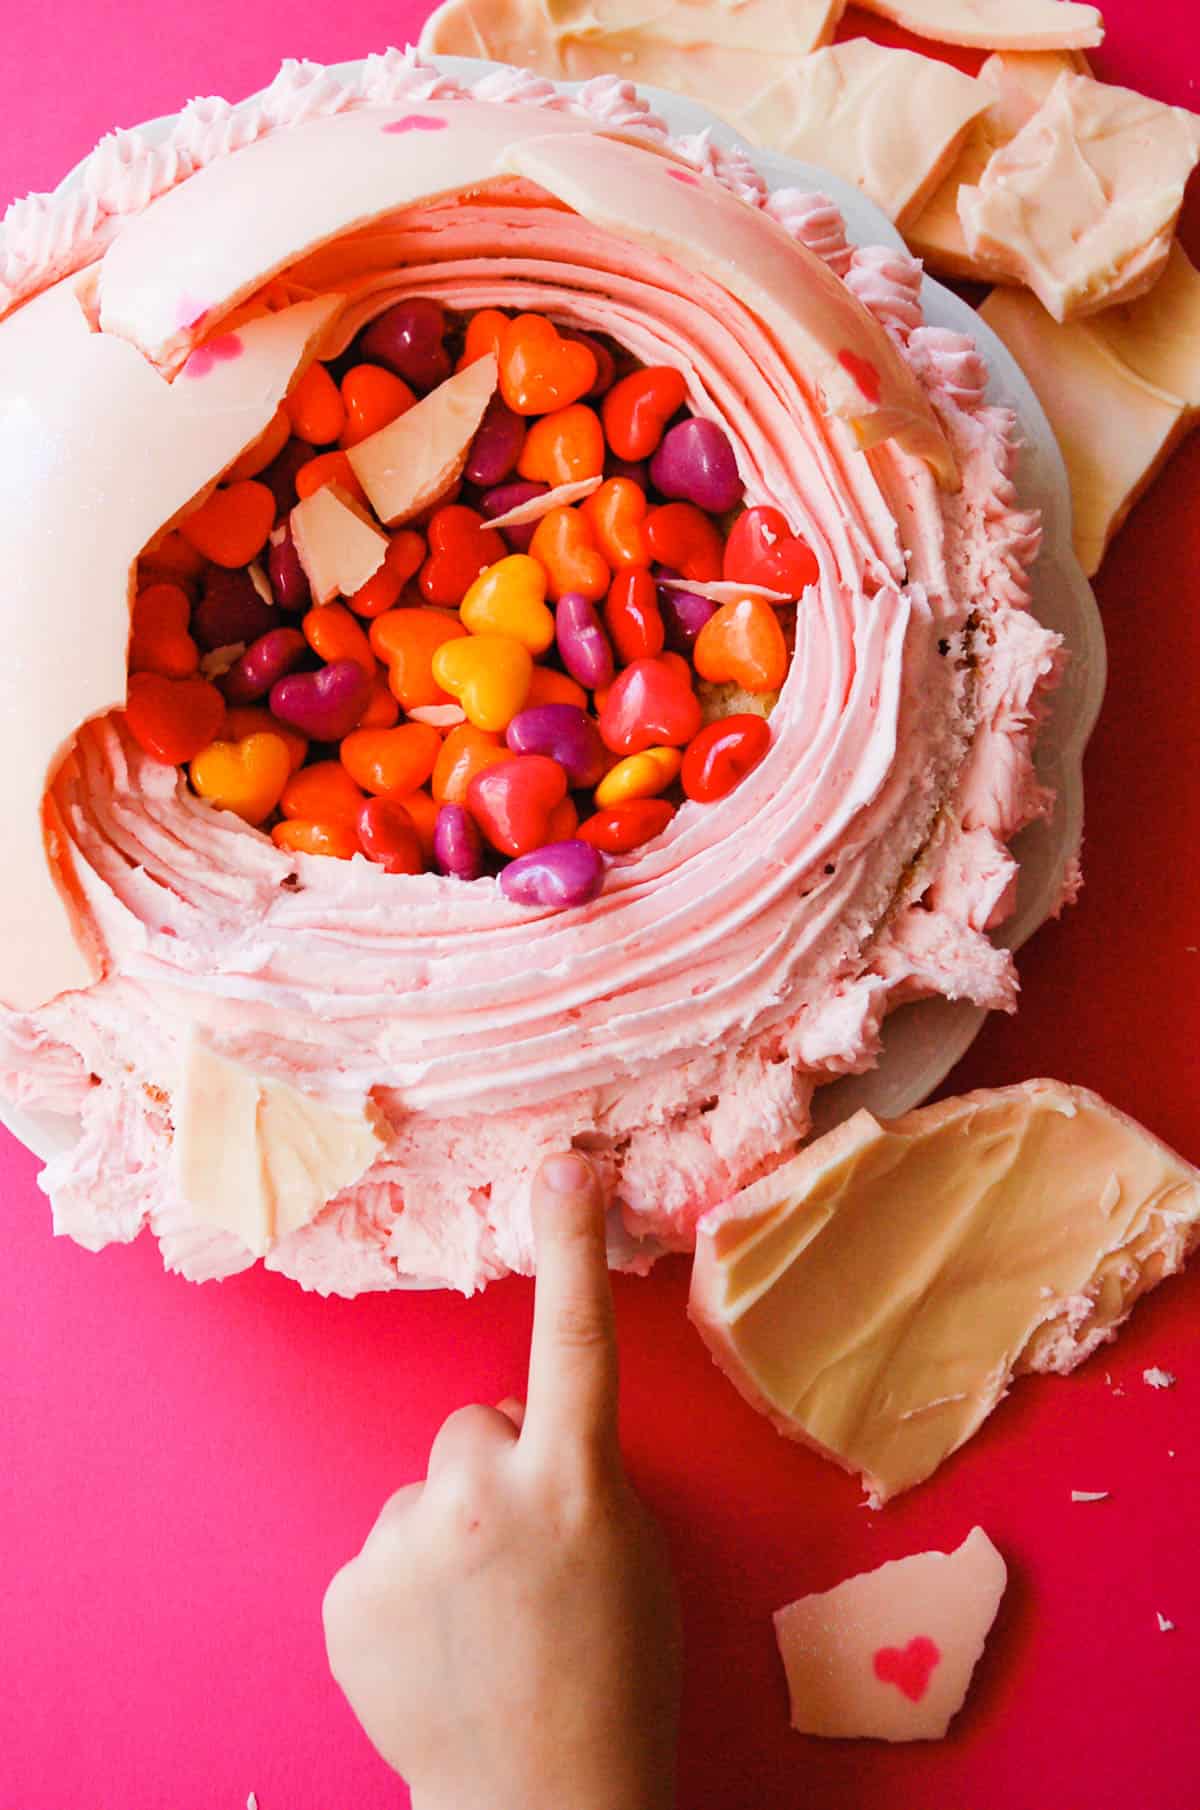 A kid reaching for frosting on a cake filled with candy.